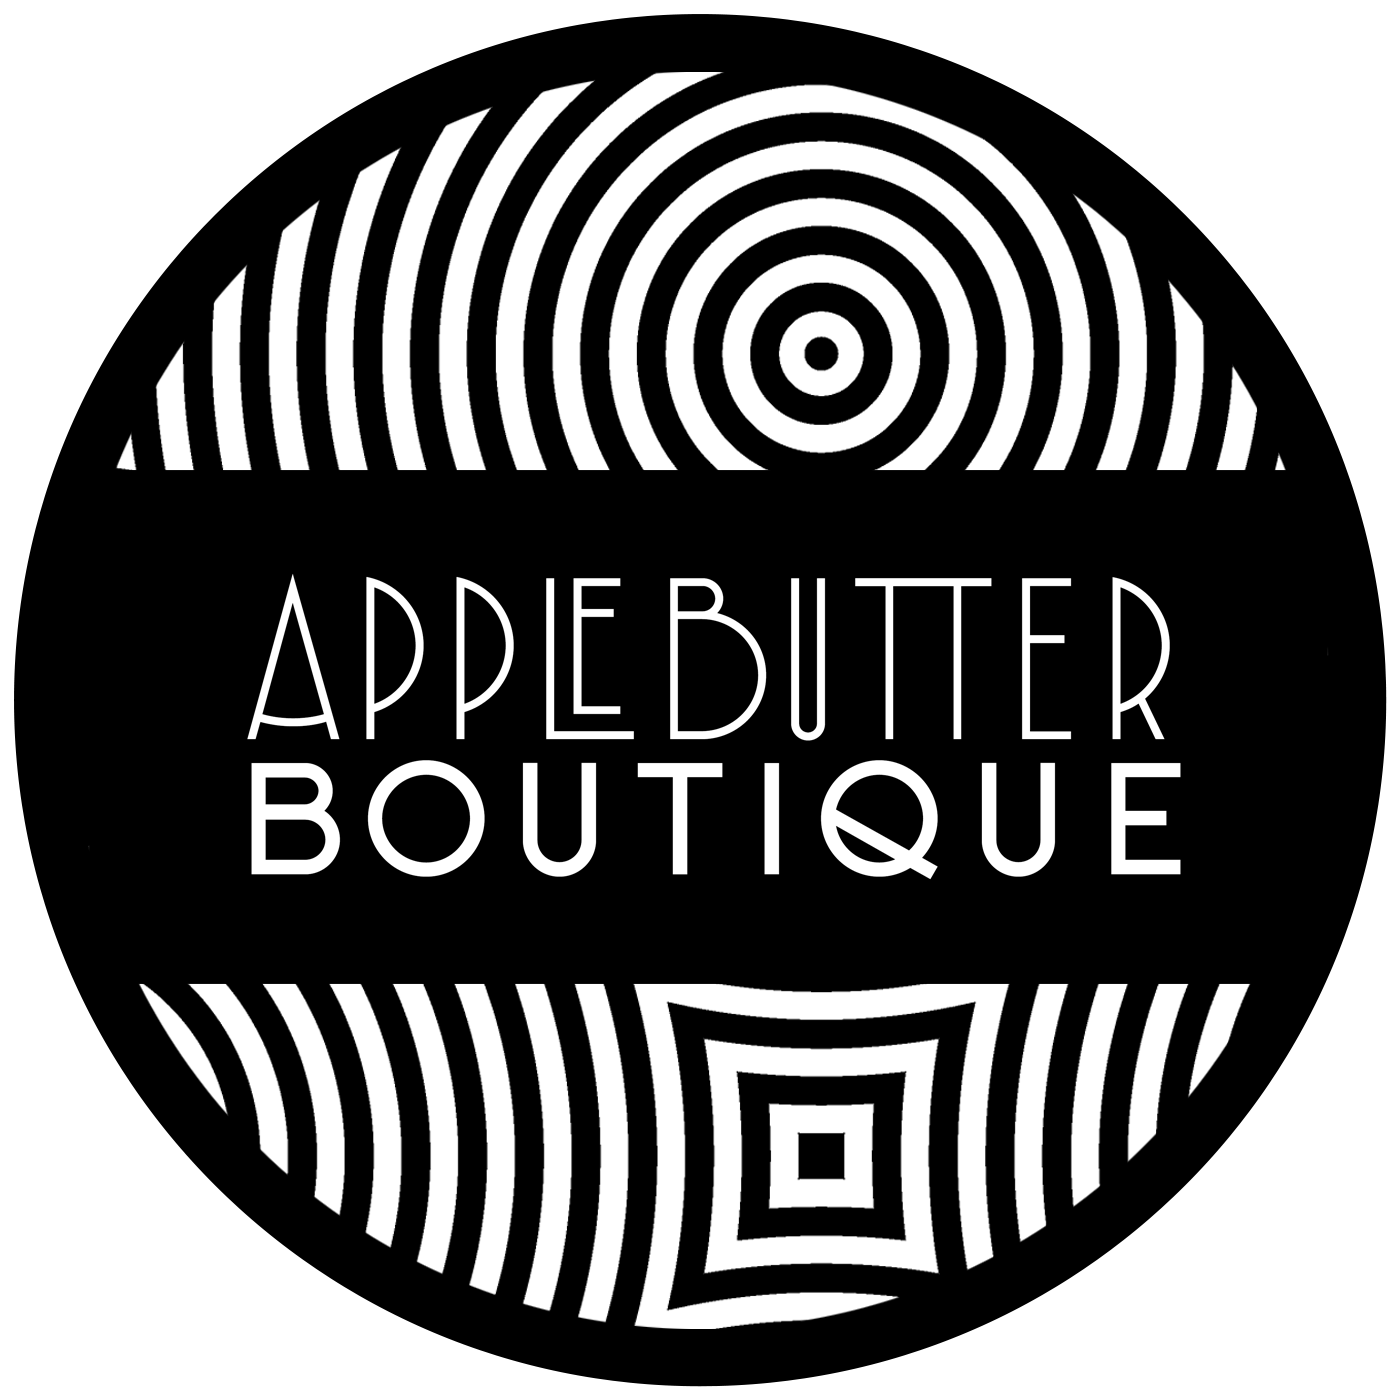 Apple Butter Boutique || be BOLD.